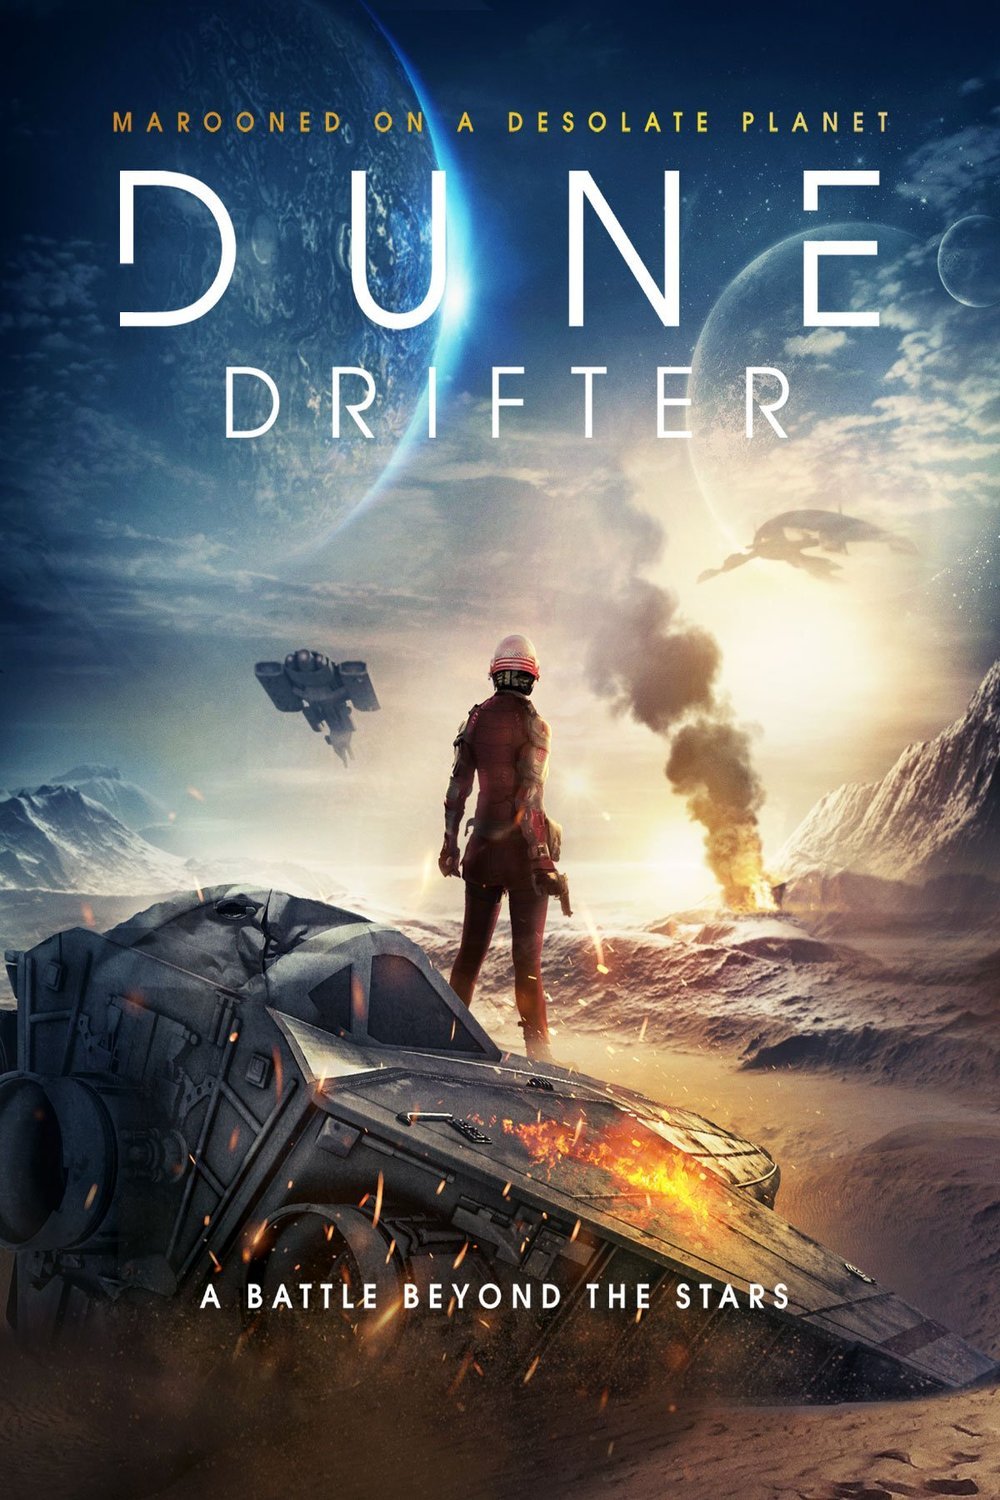 Poster of the movie Dune Drifter